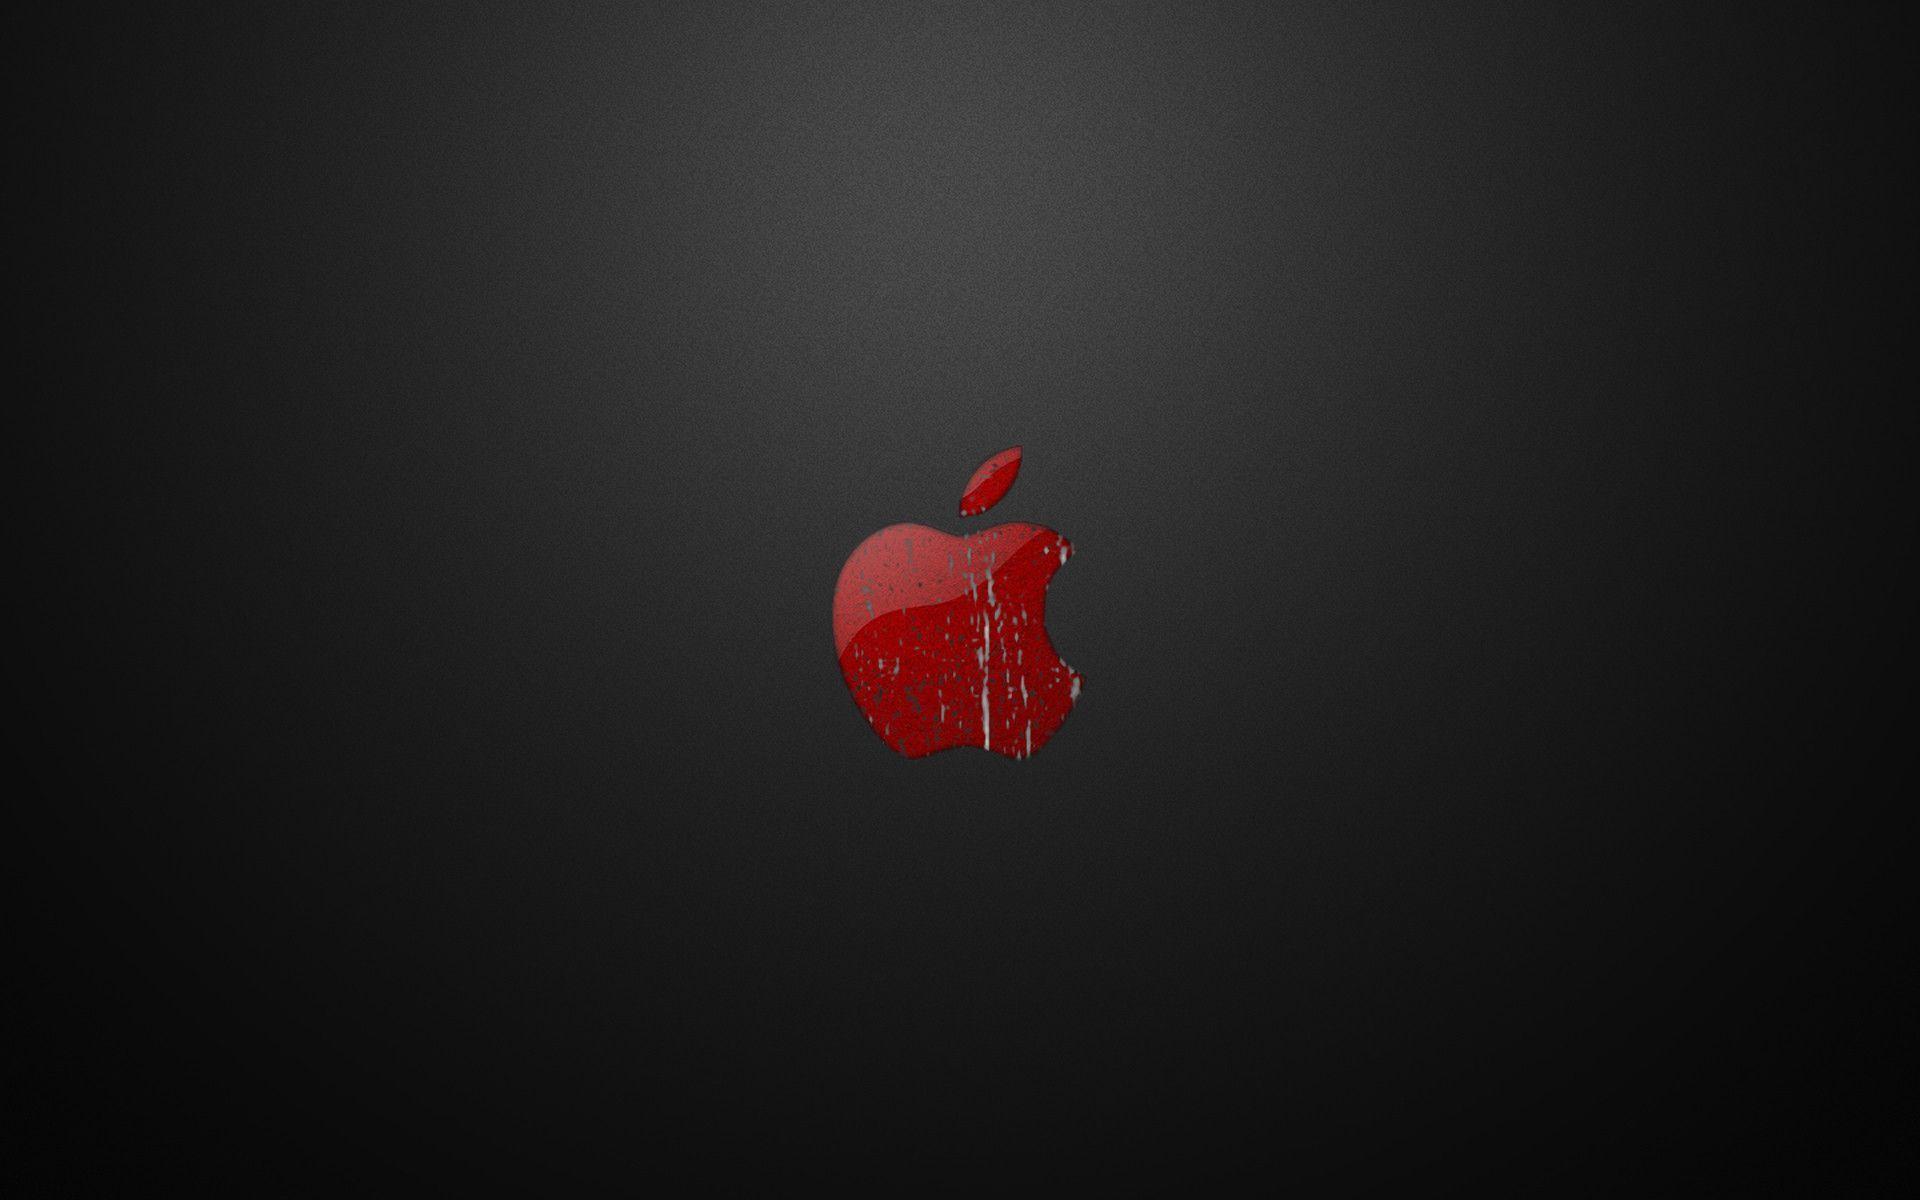 image For > Red Apple Background